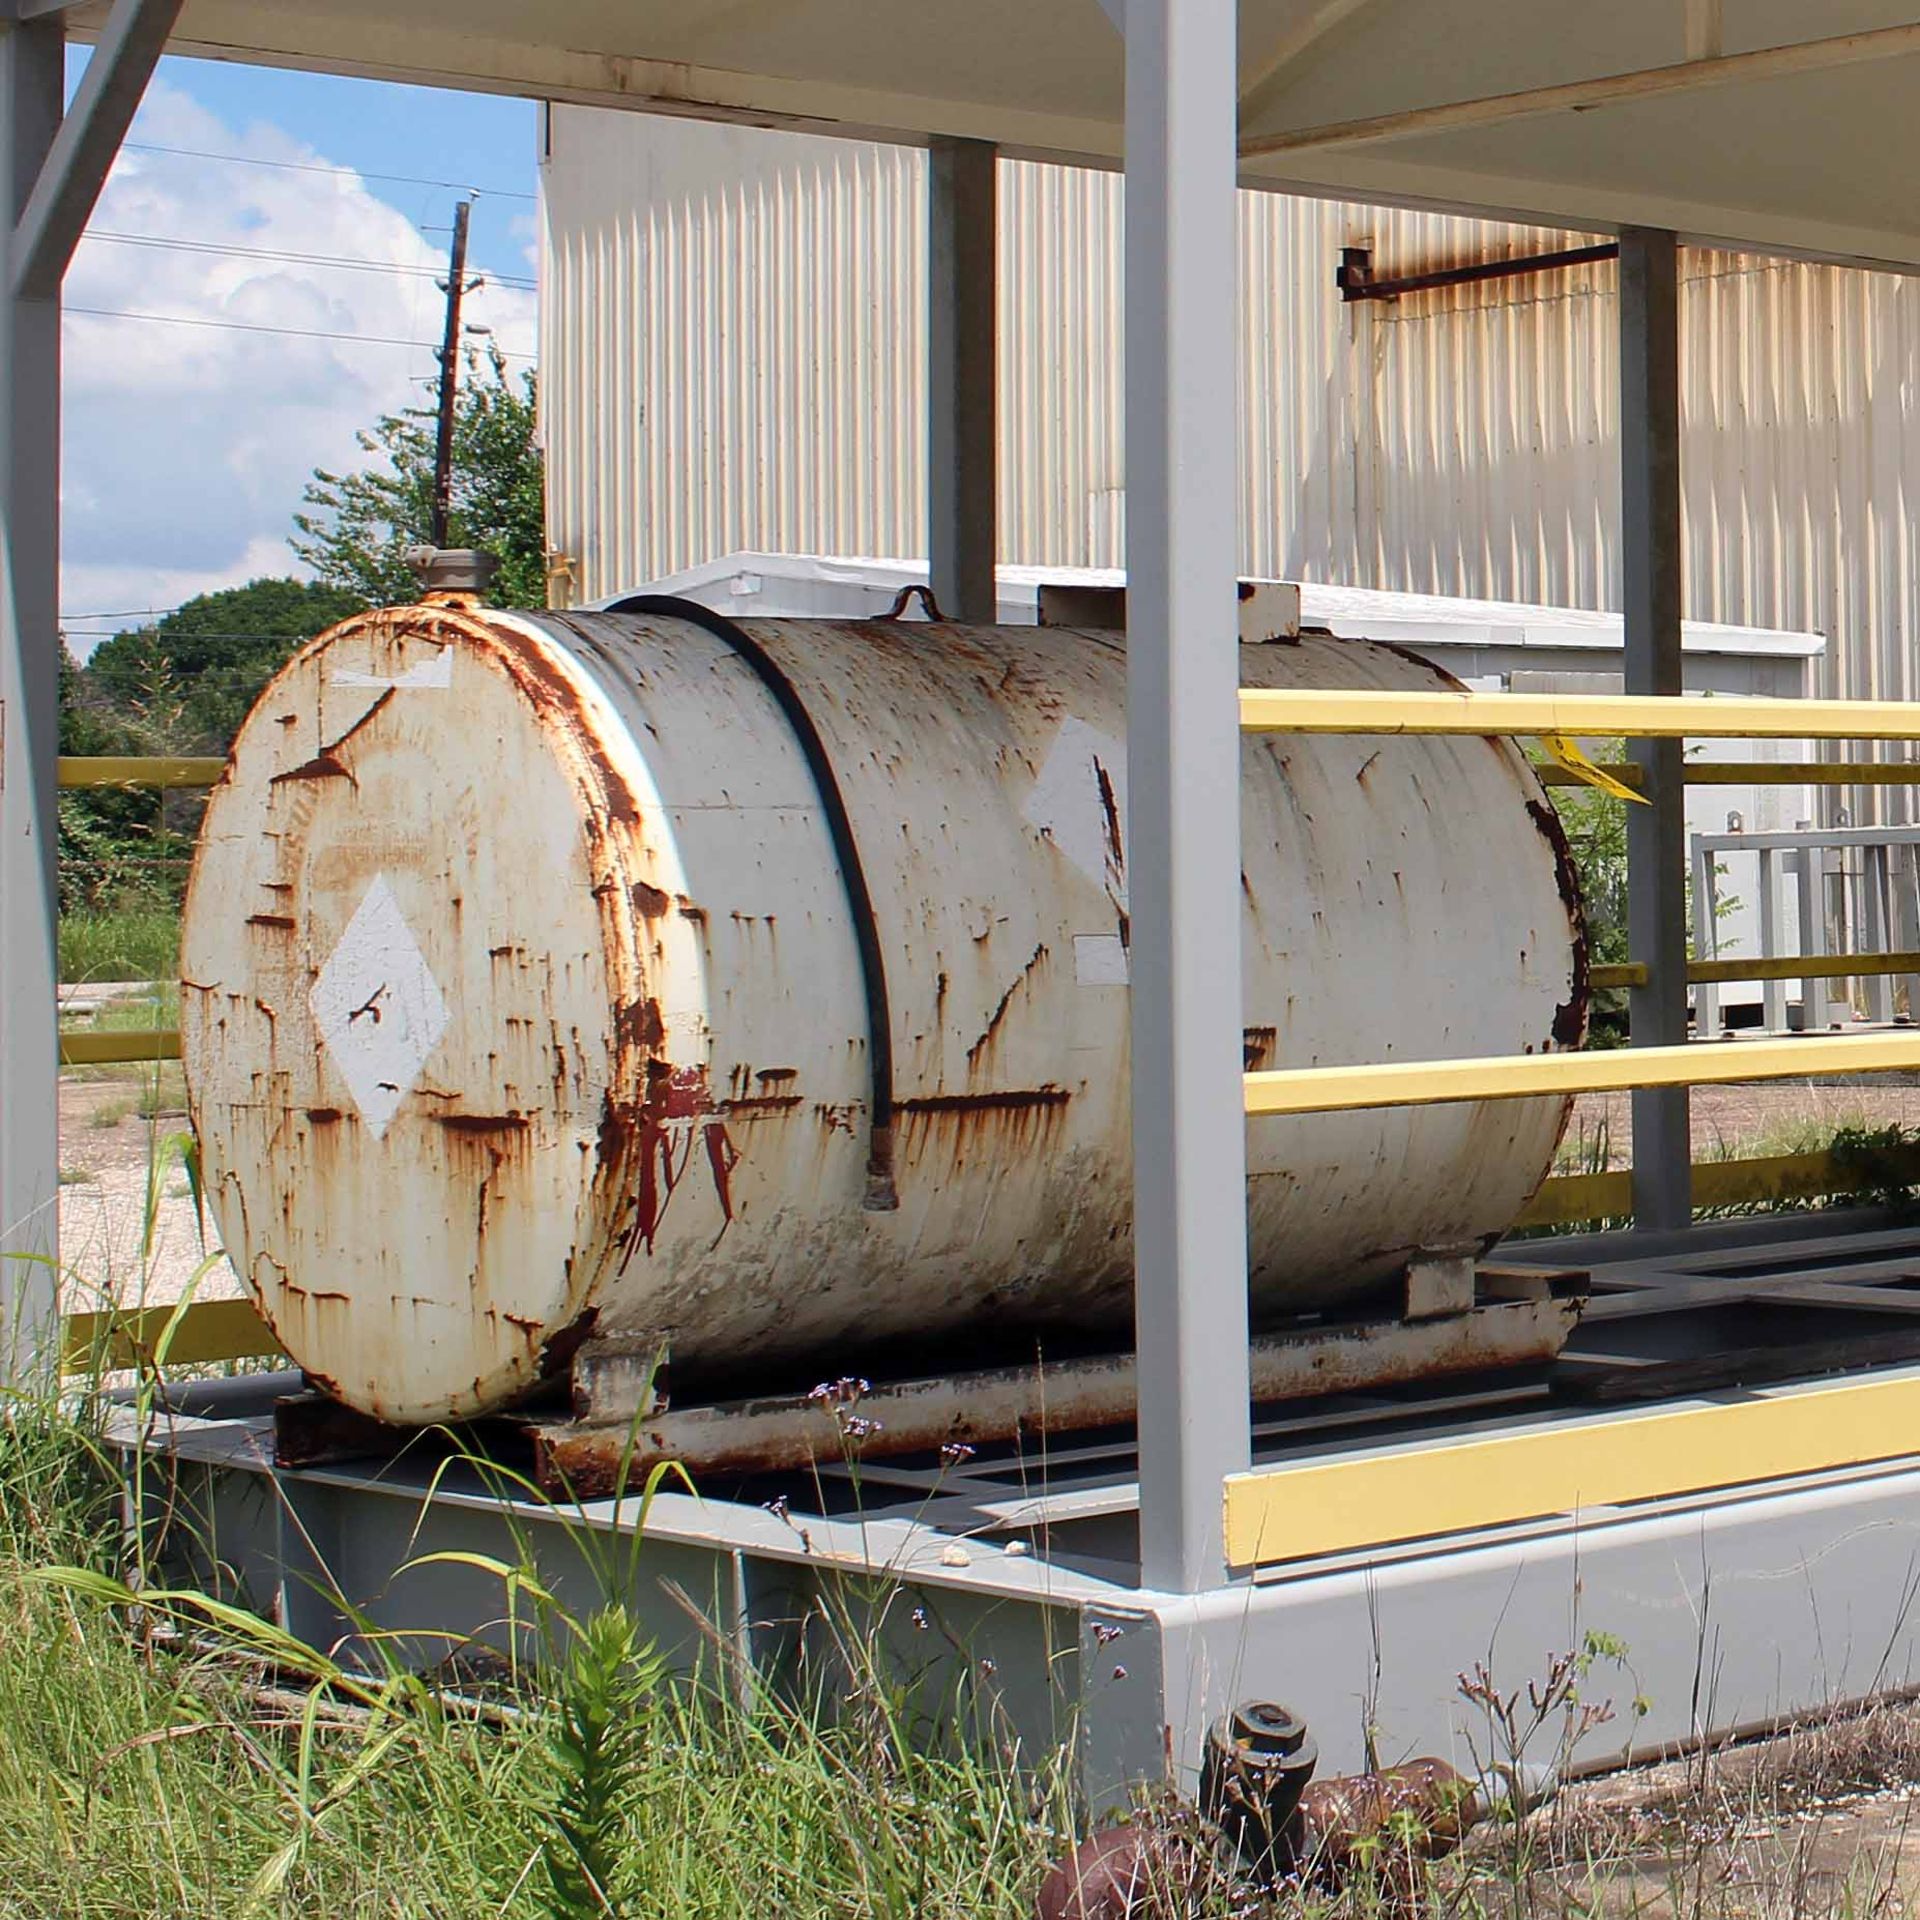 DIESEL TANK, approx. 500 gal. (Located at: 11700 Trickey Rd., Houston, TX 77067)